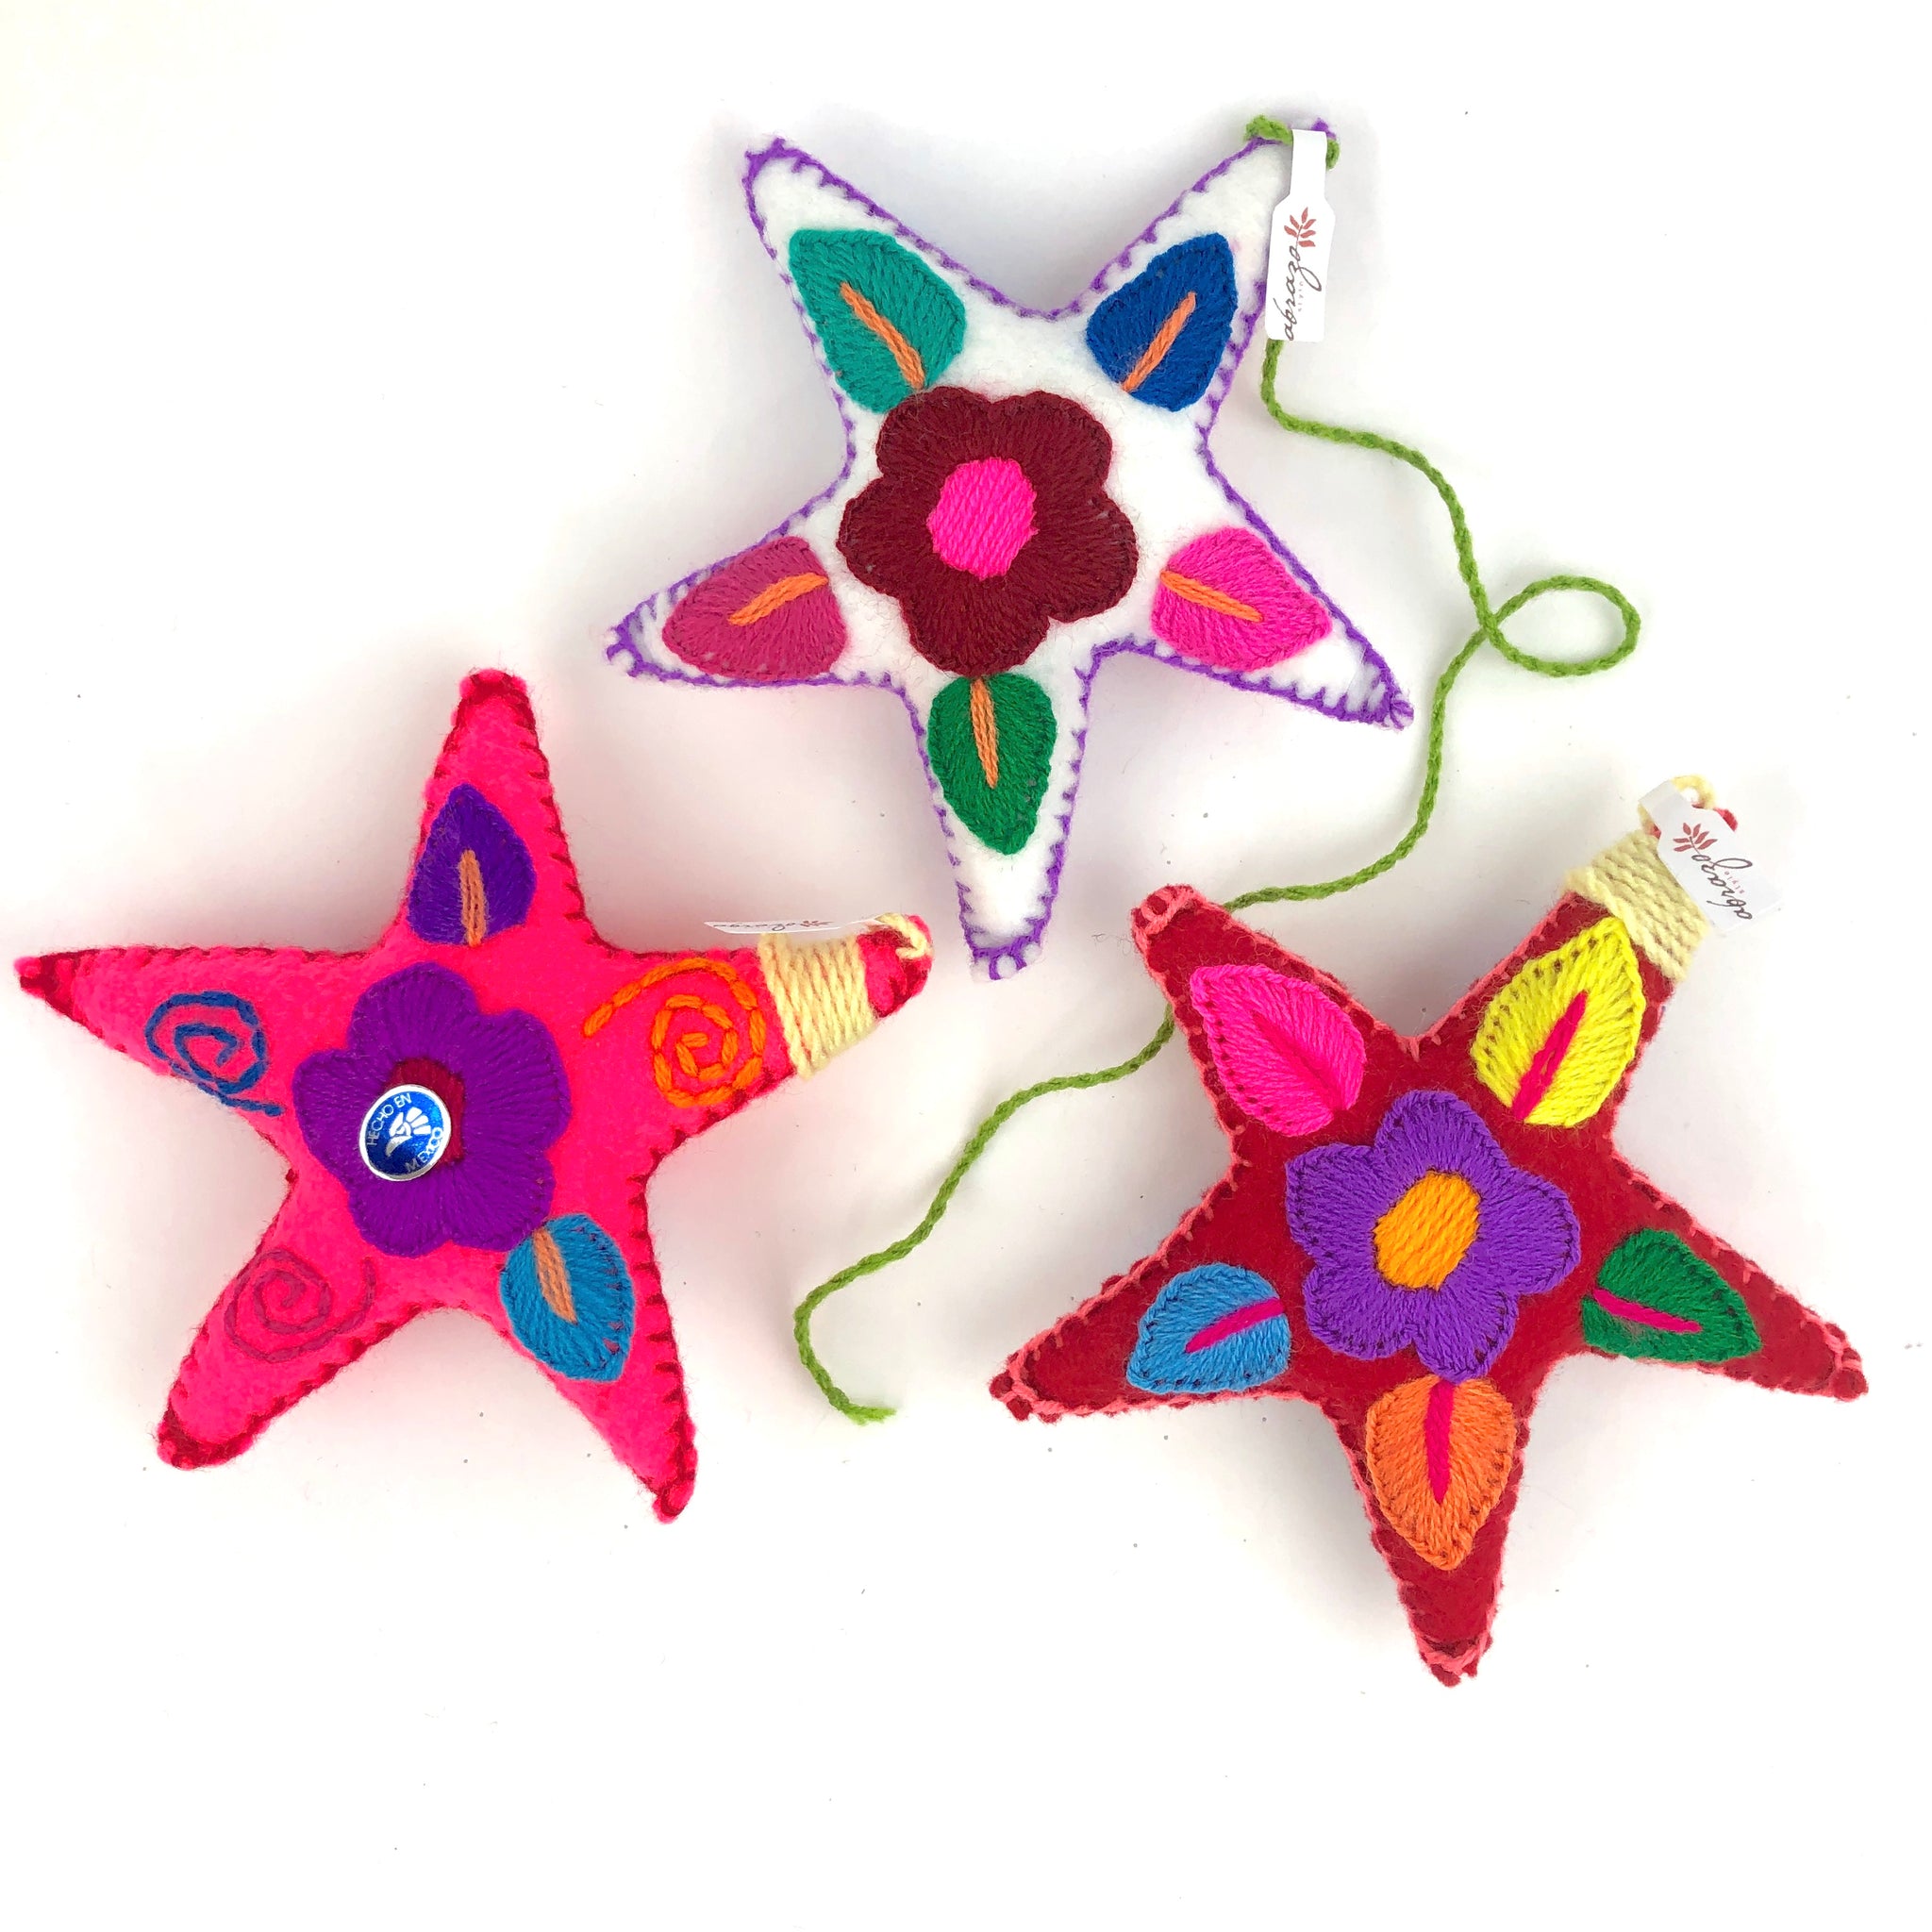 Embroidered stars, Christmas decorations, Mexican holiday stars